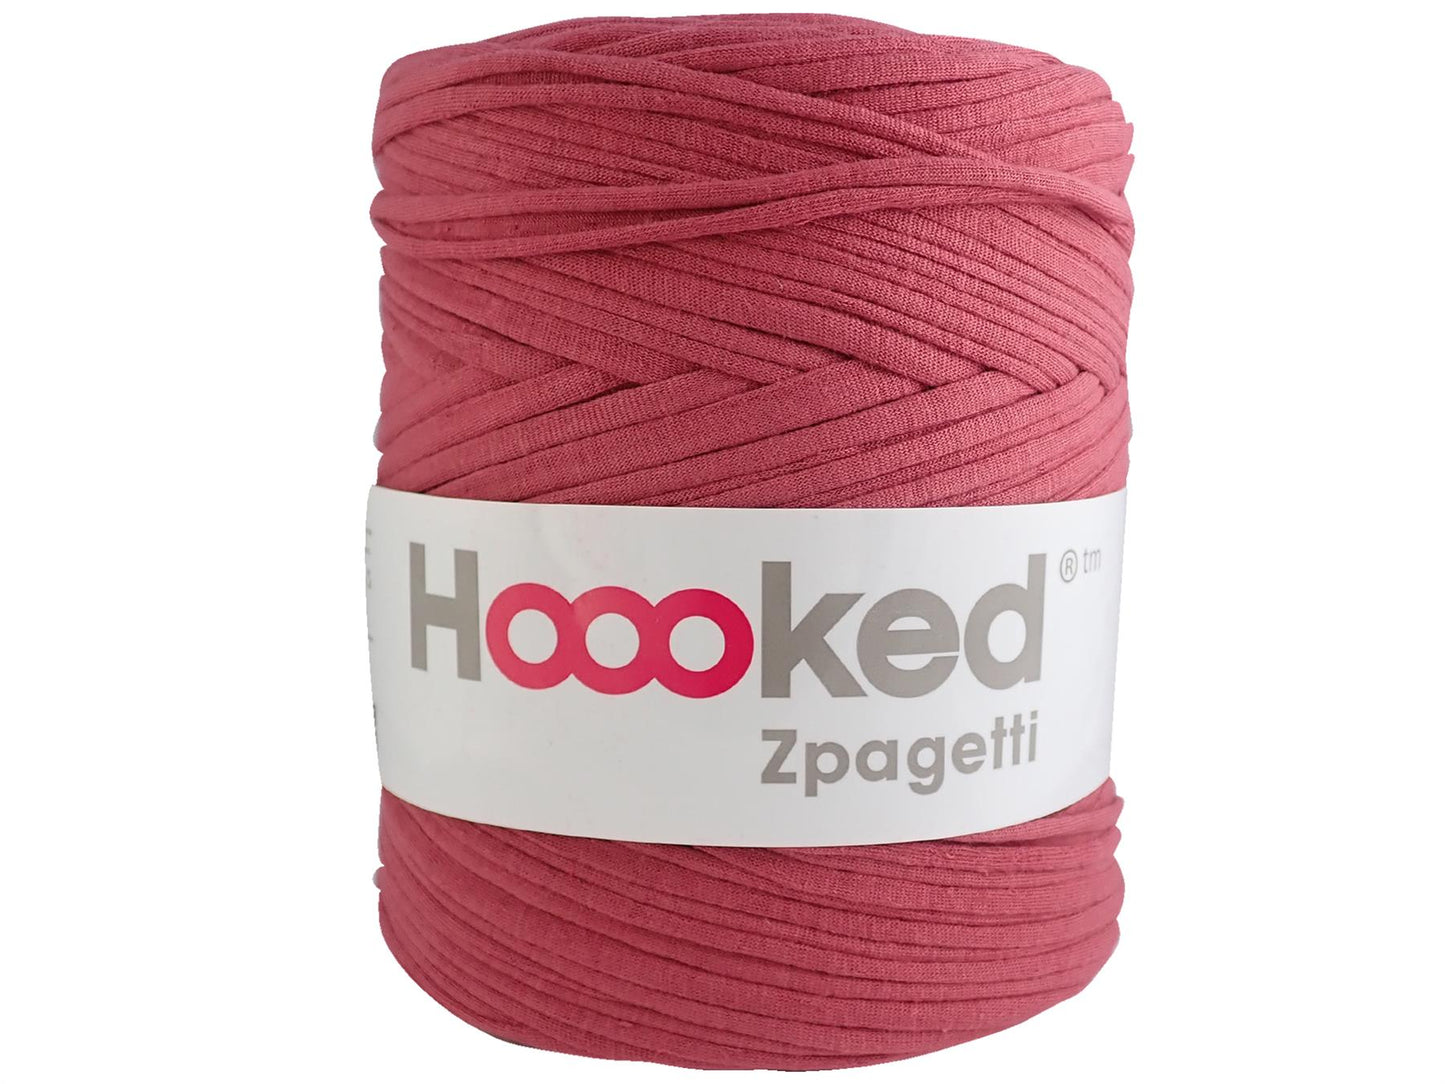 Hoooked Zpagetti Vintage Red Cotton T-Shirt Yarn - 120M 700g